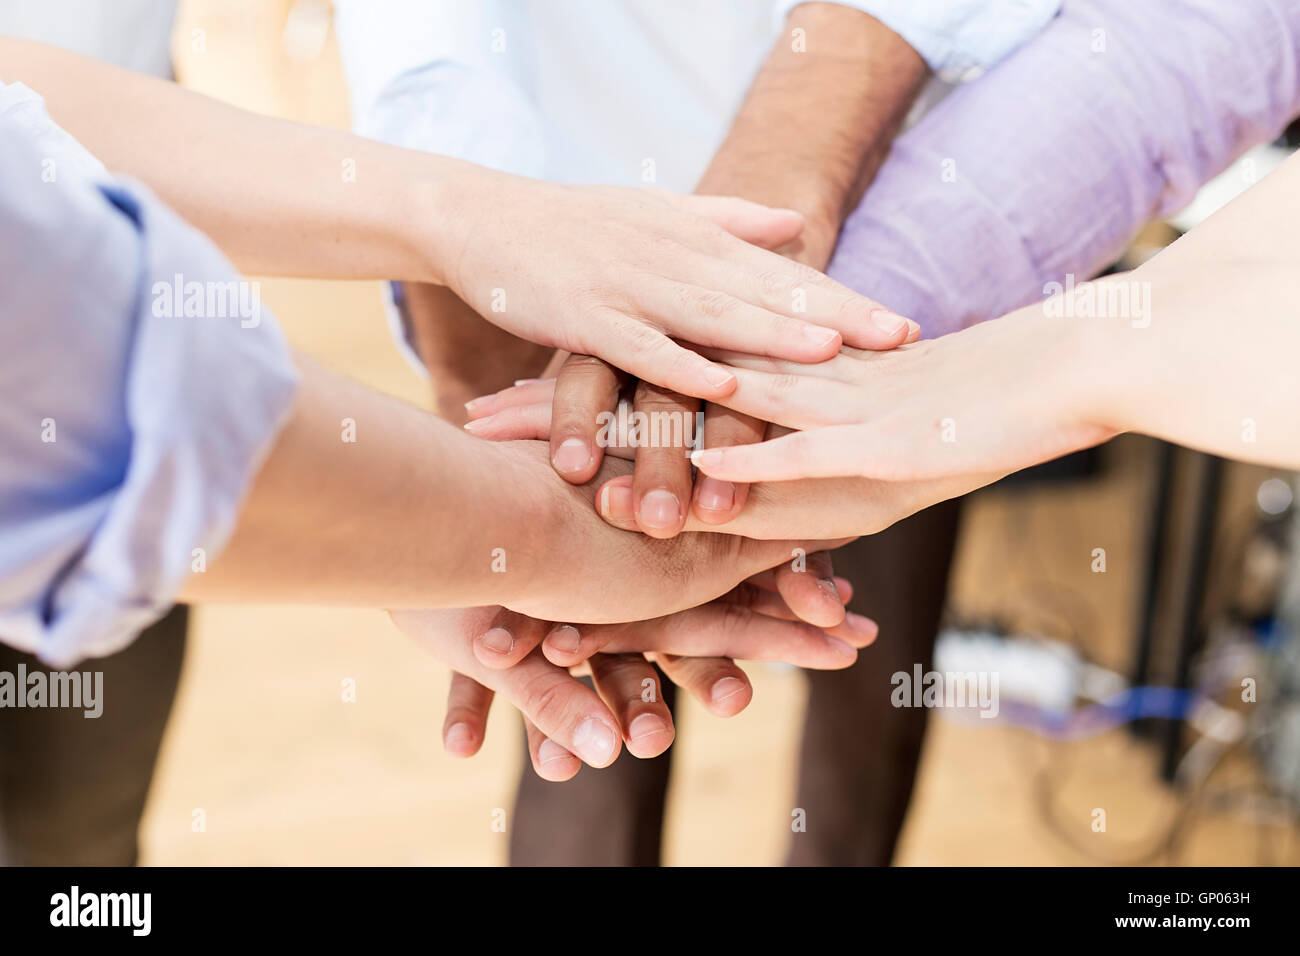 Close up view at group of hands holding together Stock Photo